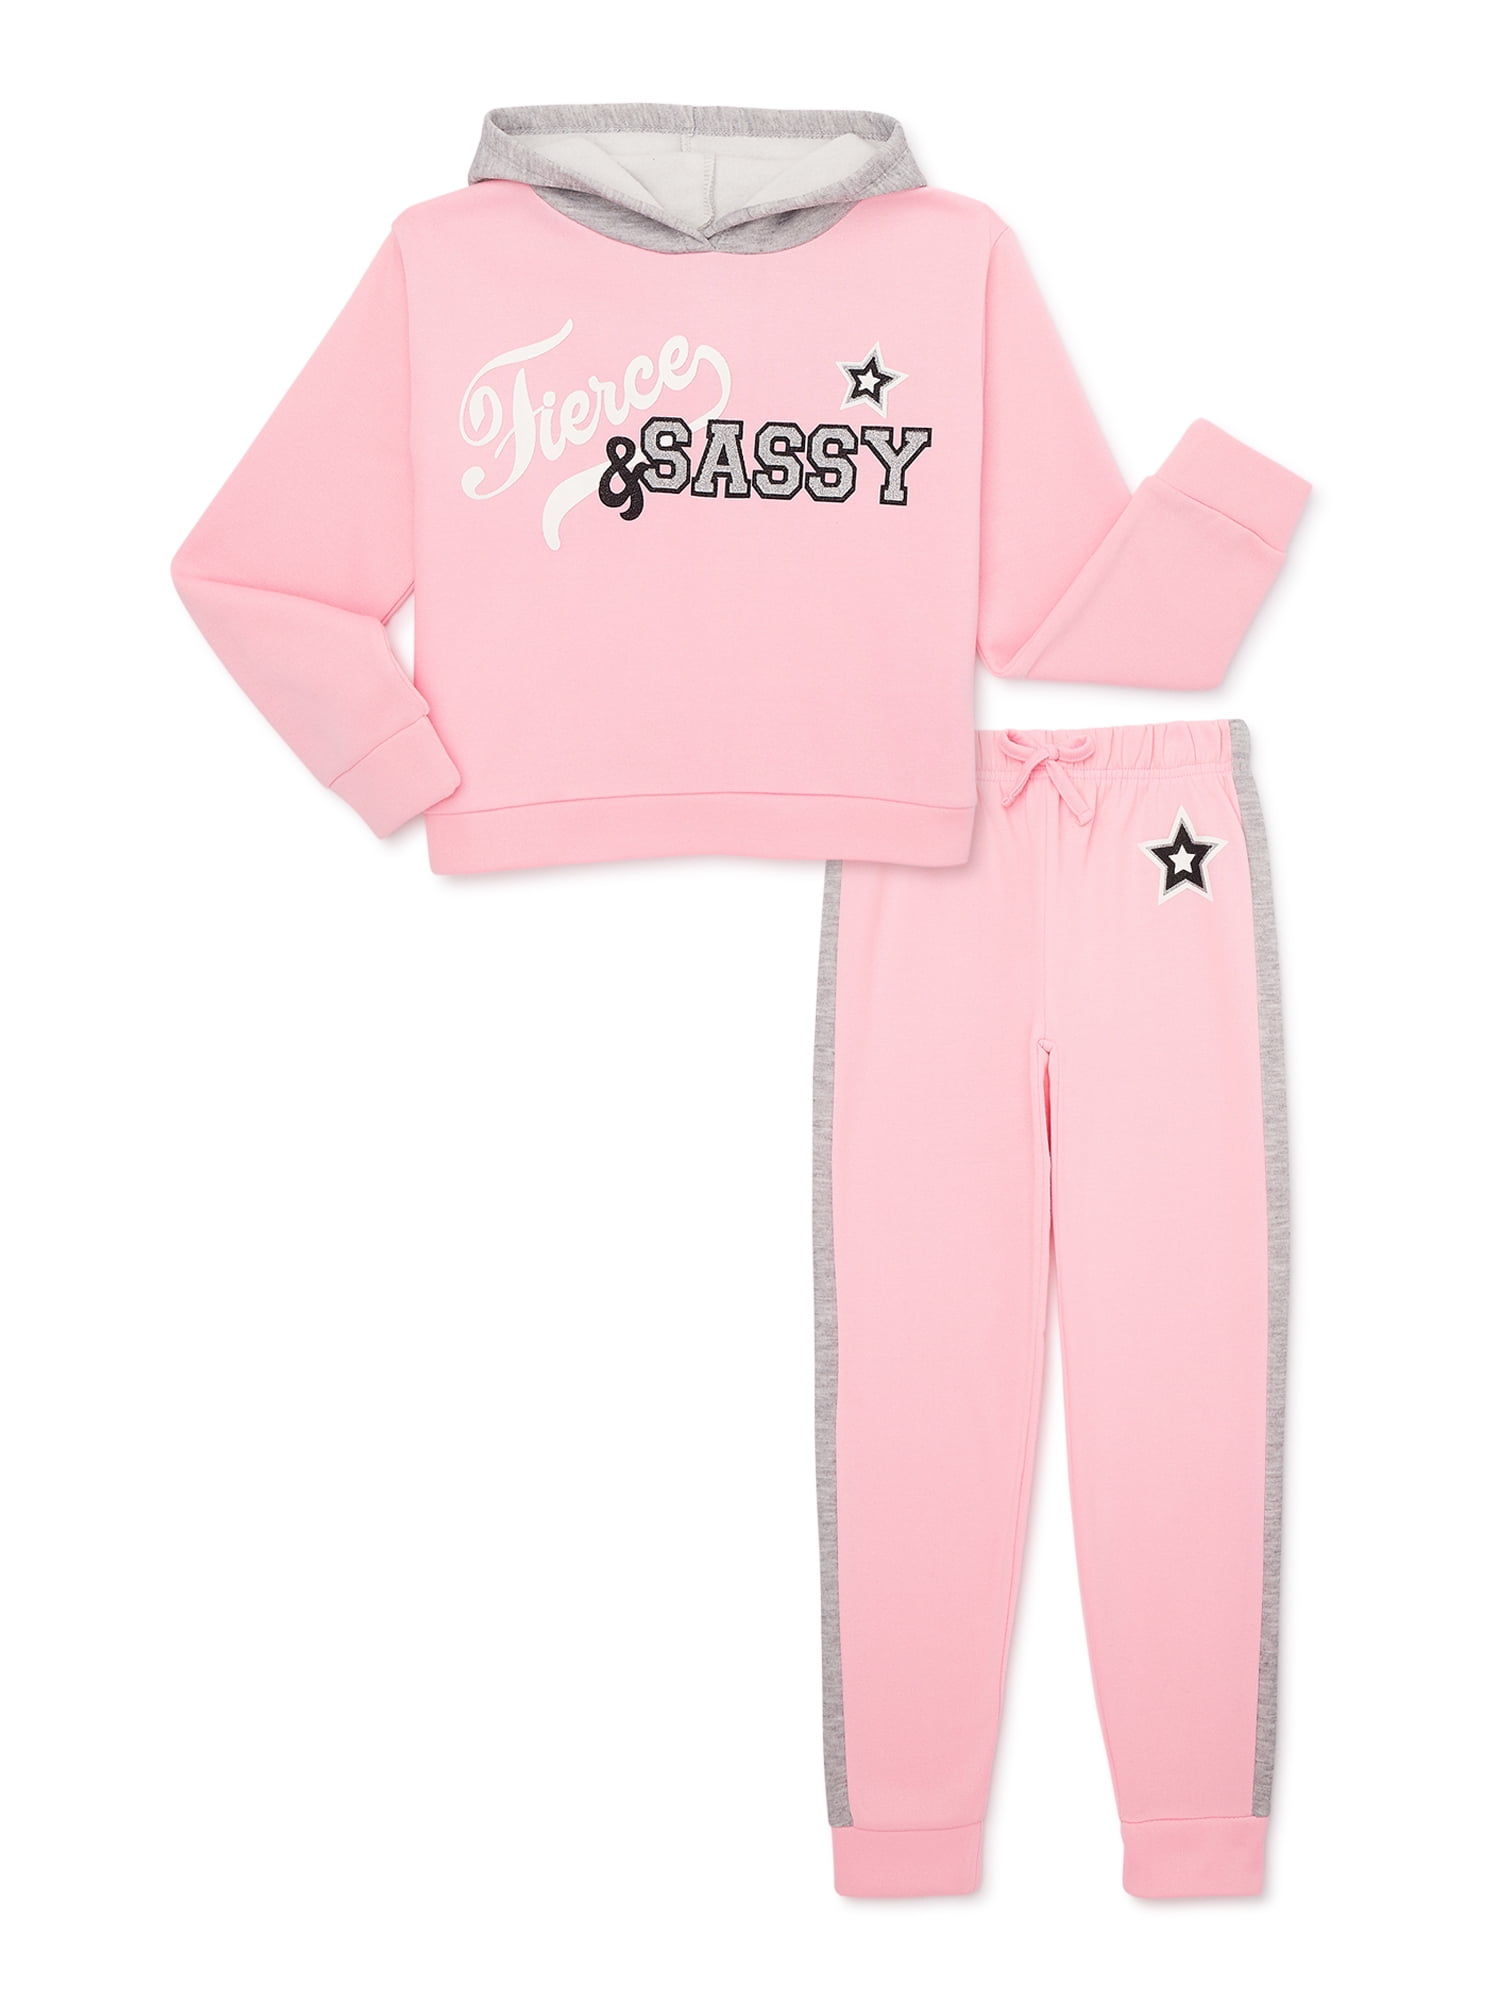 Sweet Butterfly Girls Fleece Hoodie and Joggers Outfit Set, 2-Piece Set ...